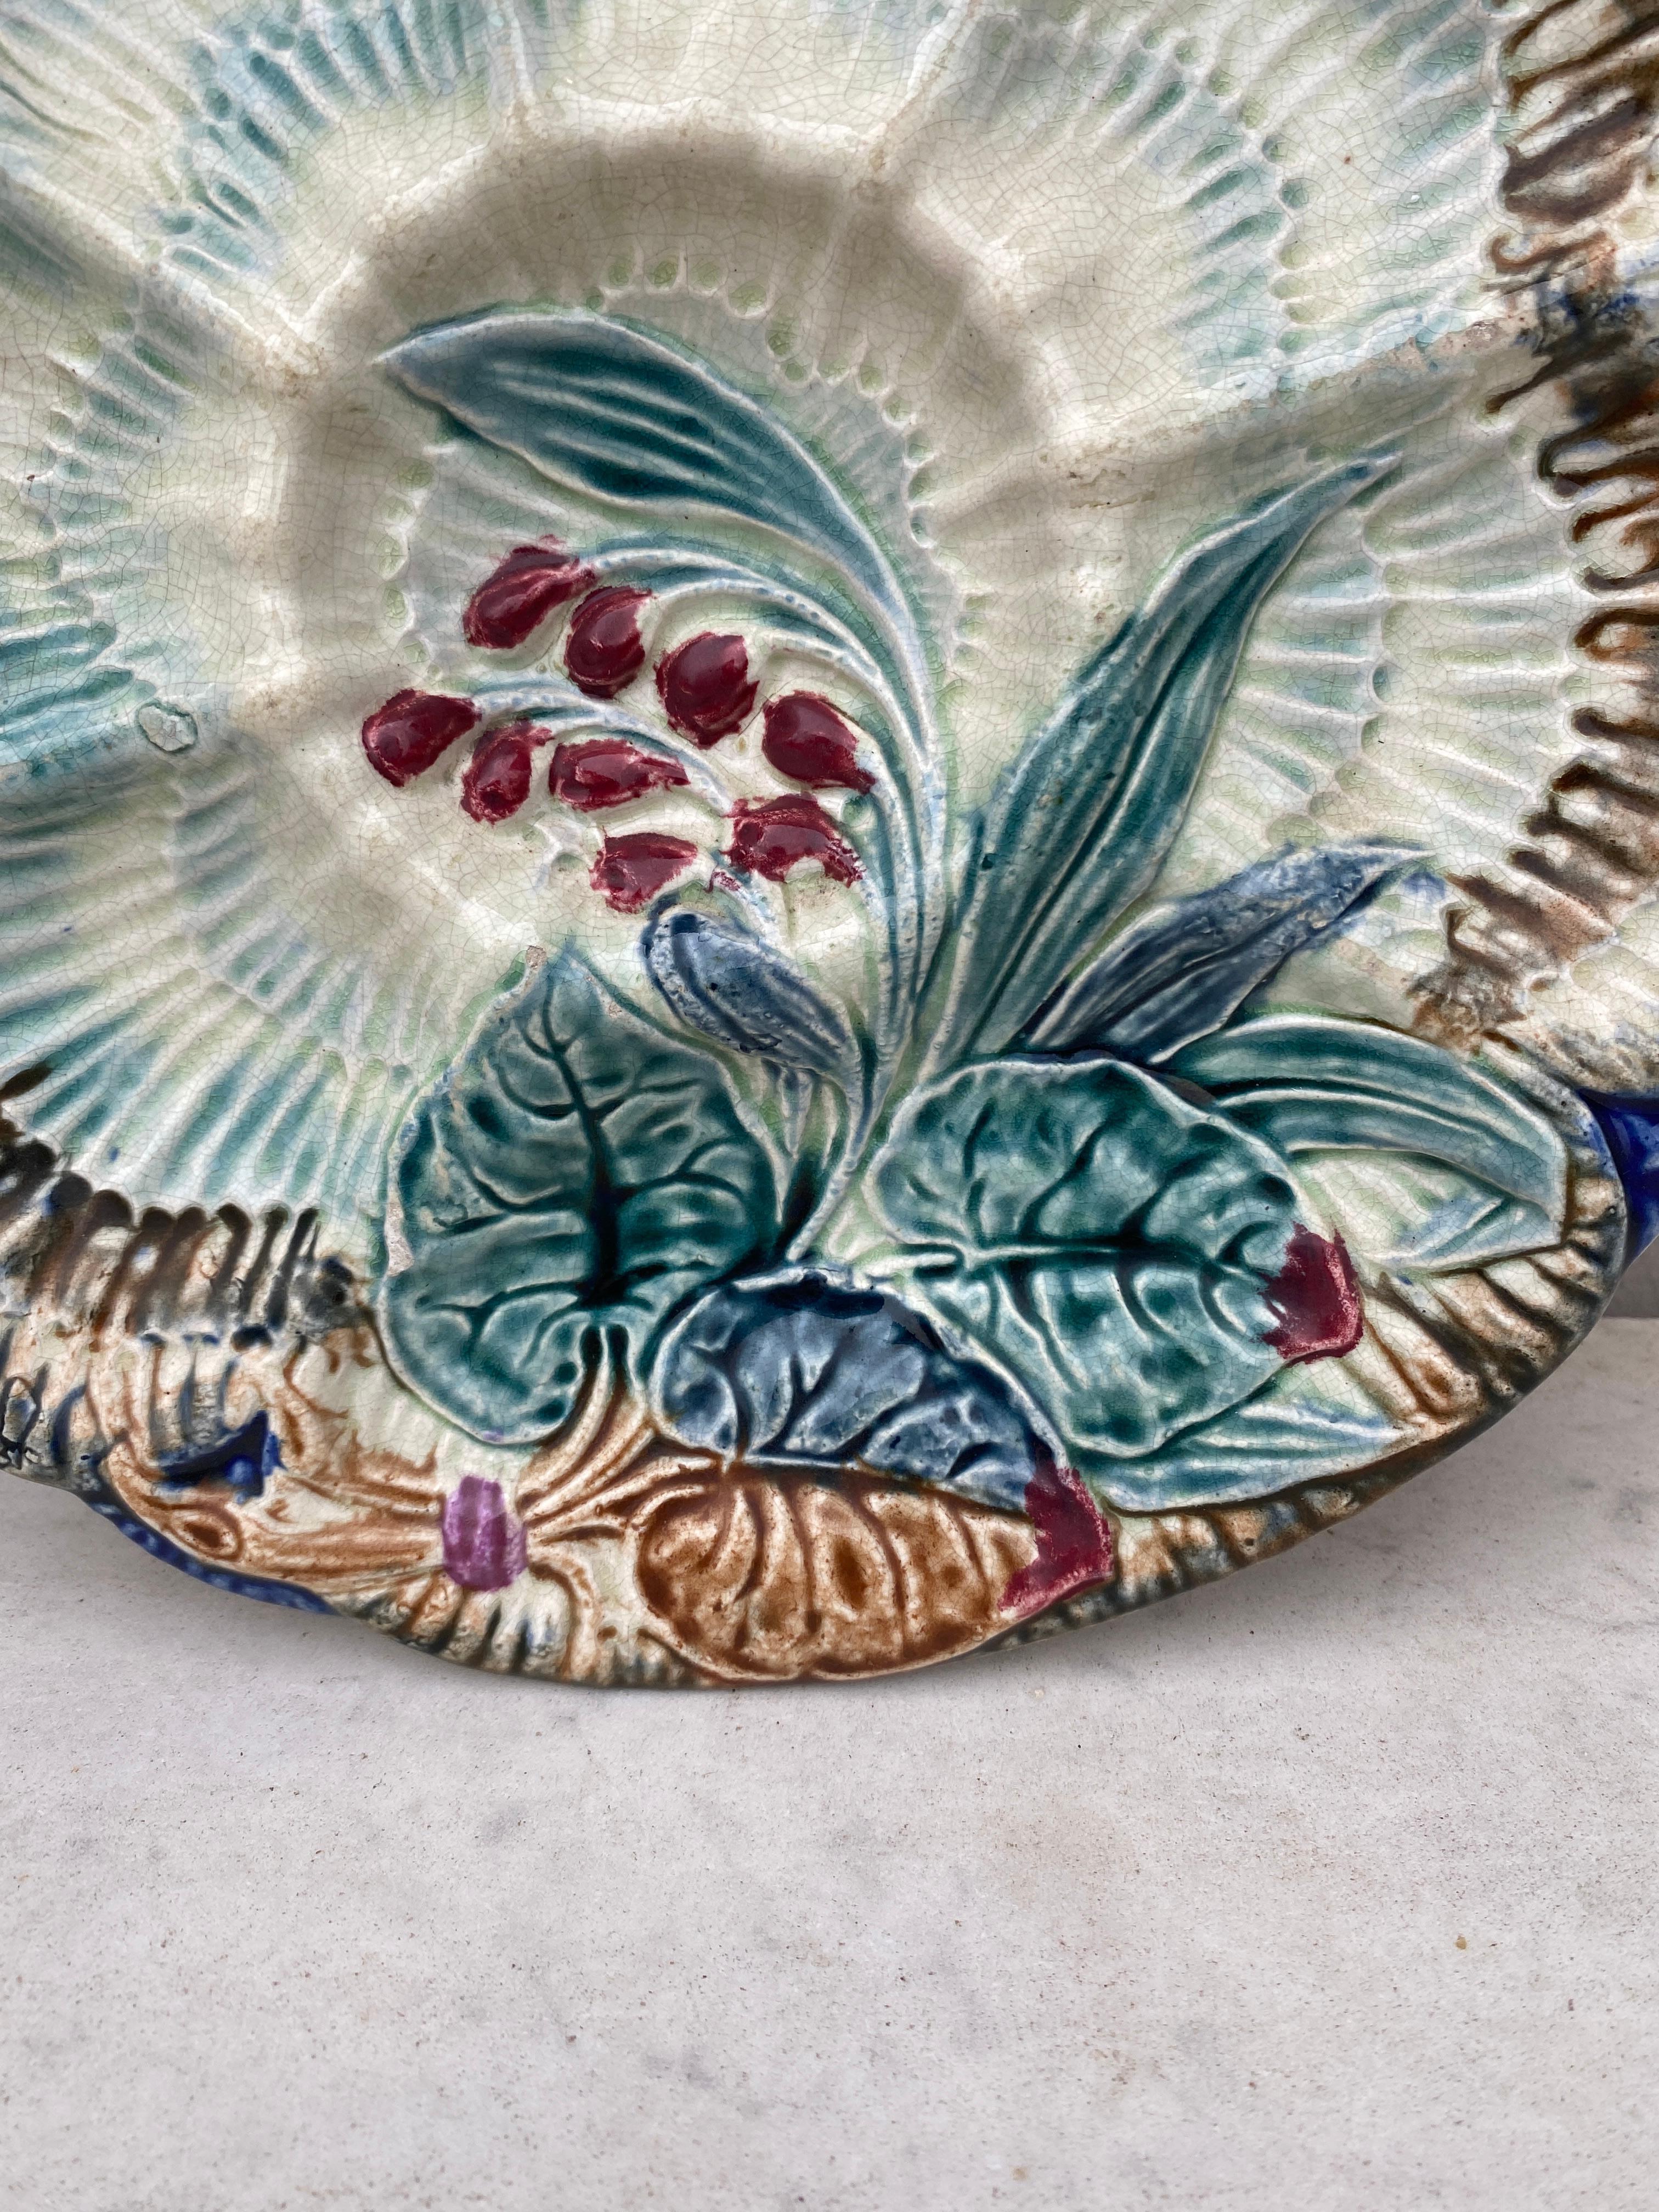 19th century Majolica oyster plate Wasmuel (Belgium) decorated with flowers.